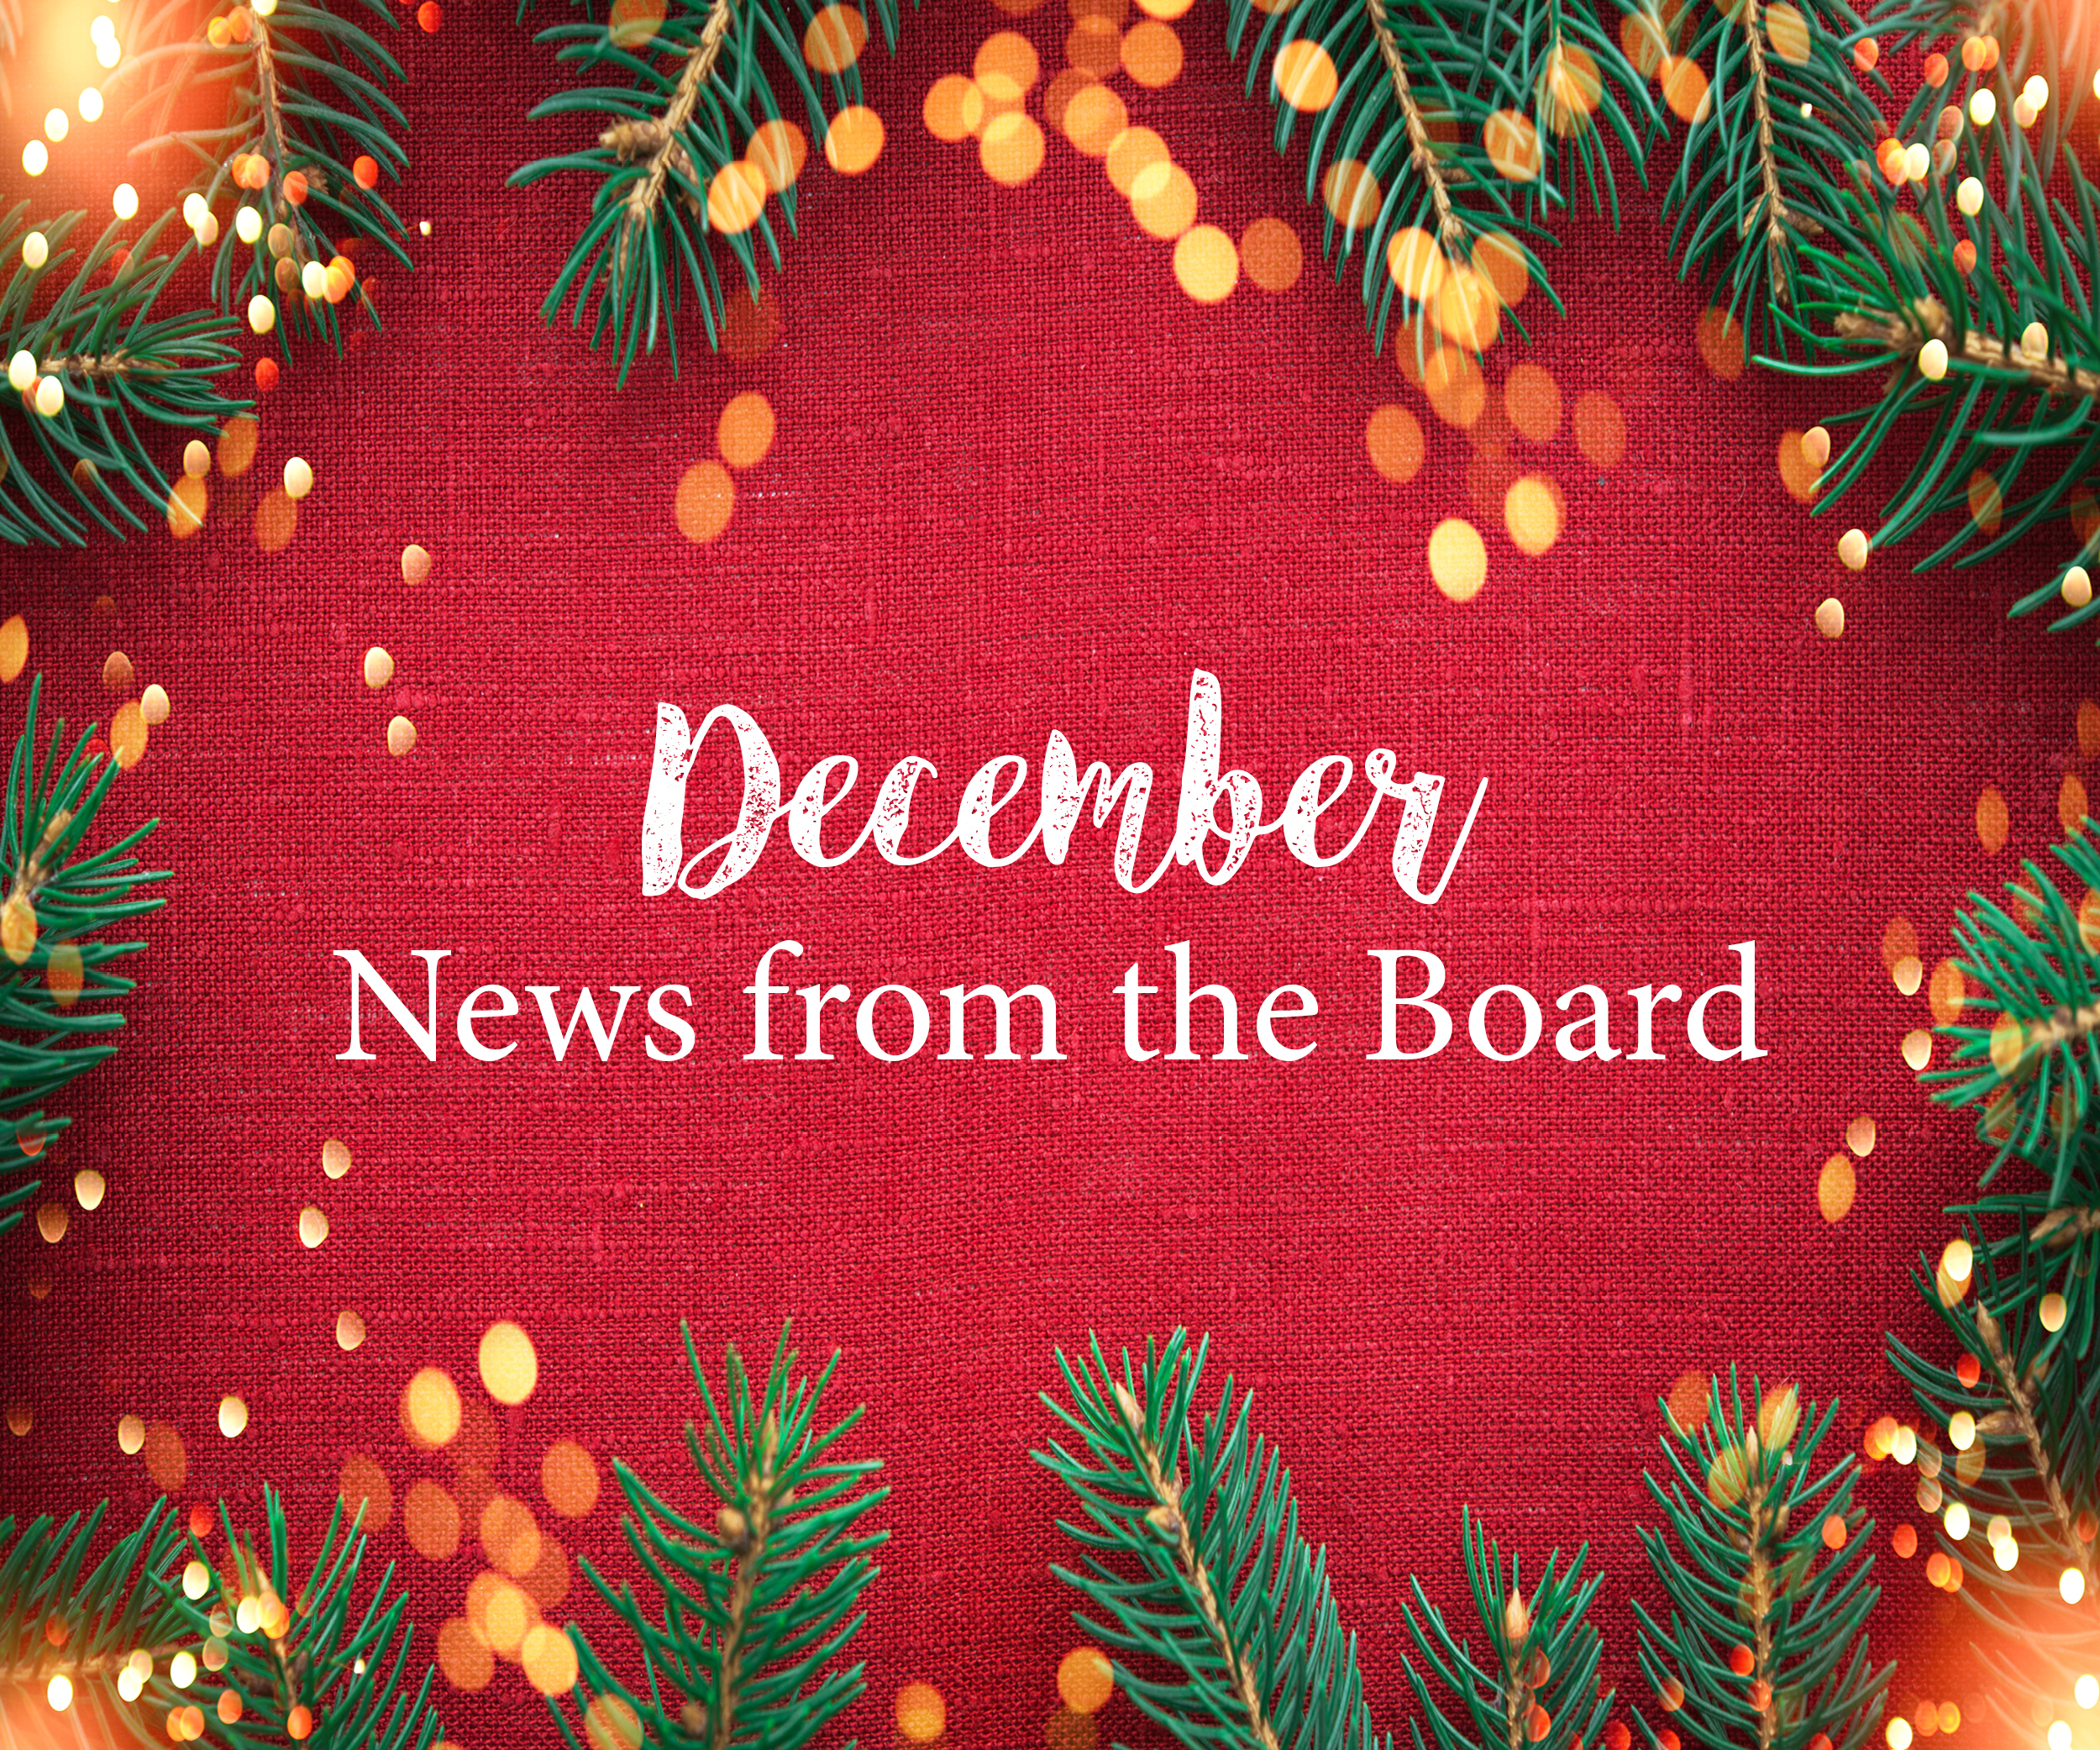 Georgetown Colony 1 News from the Board - December 2022